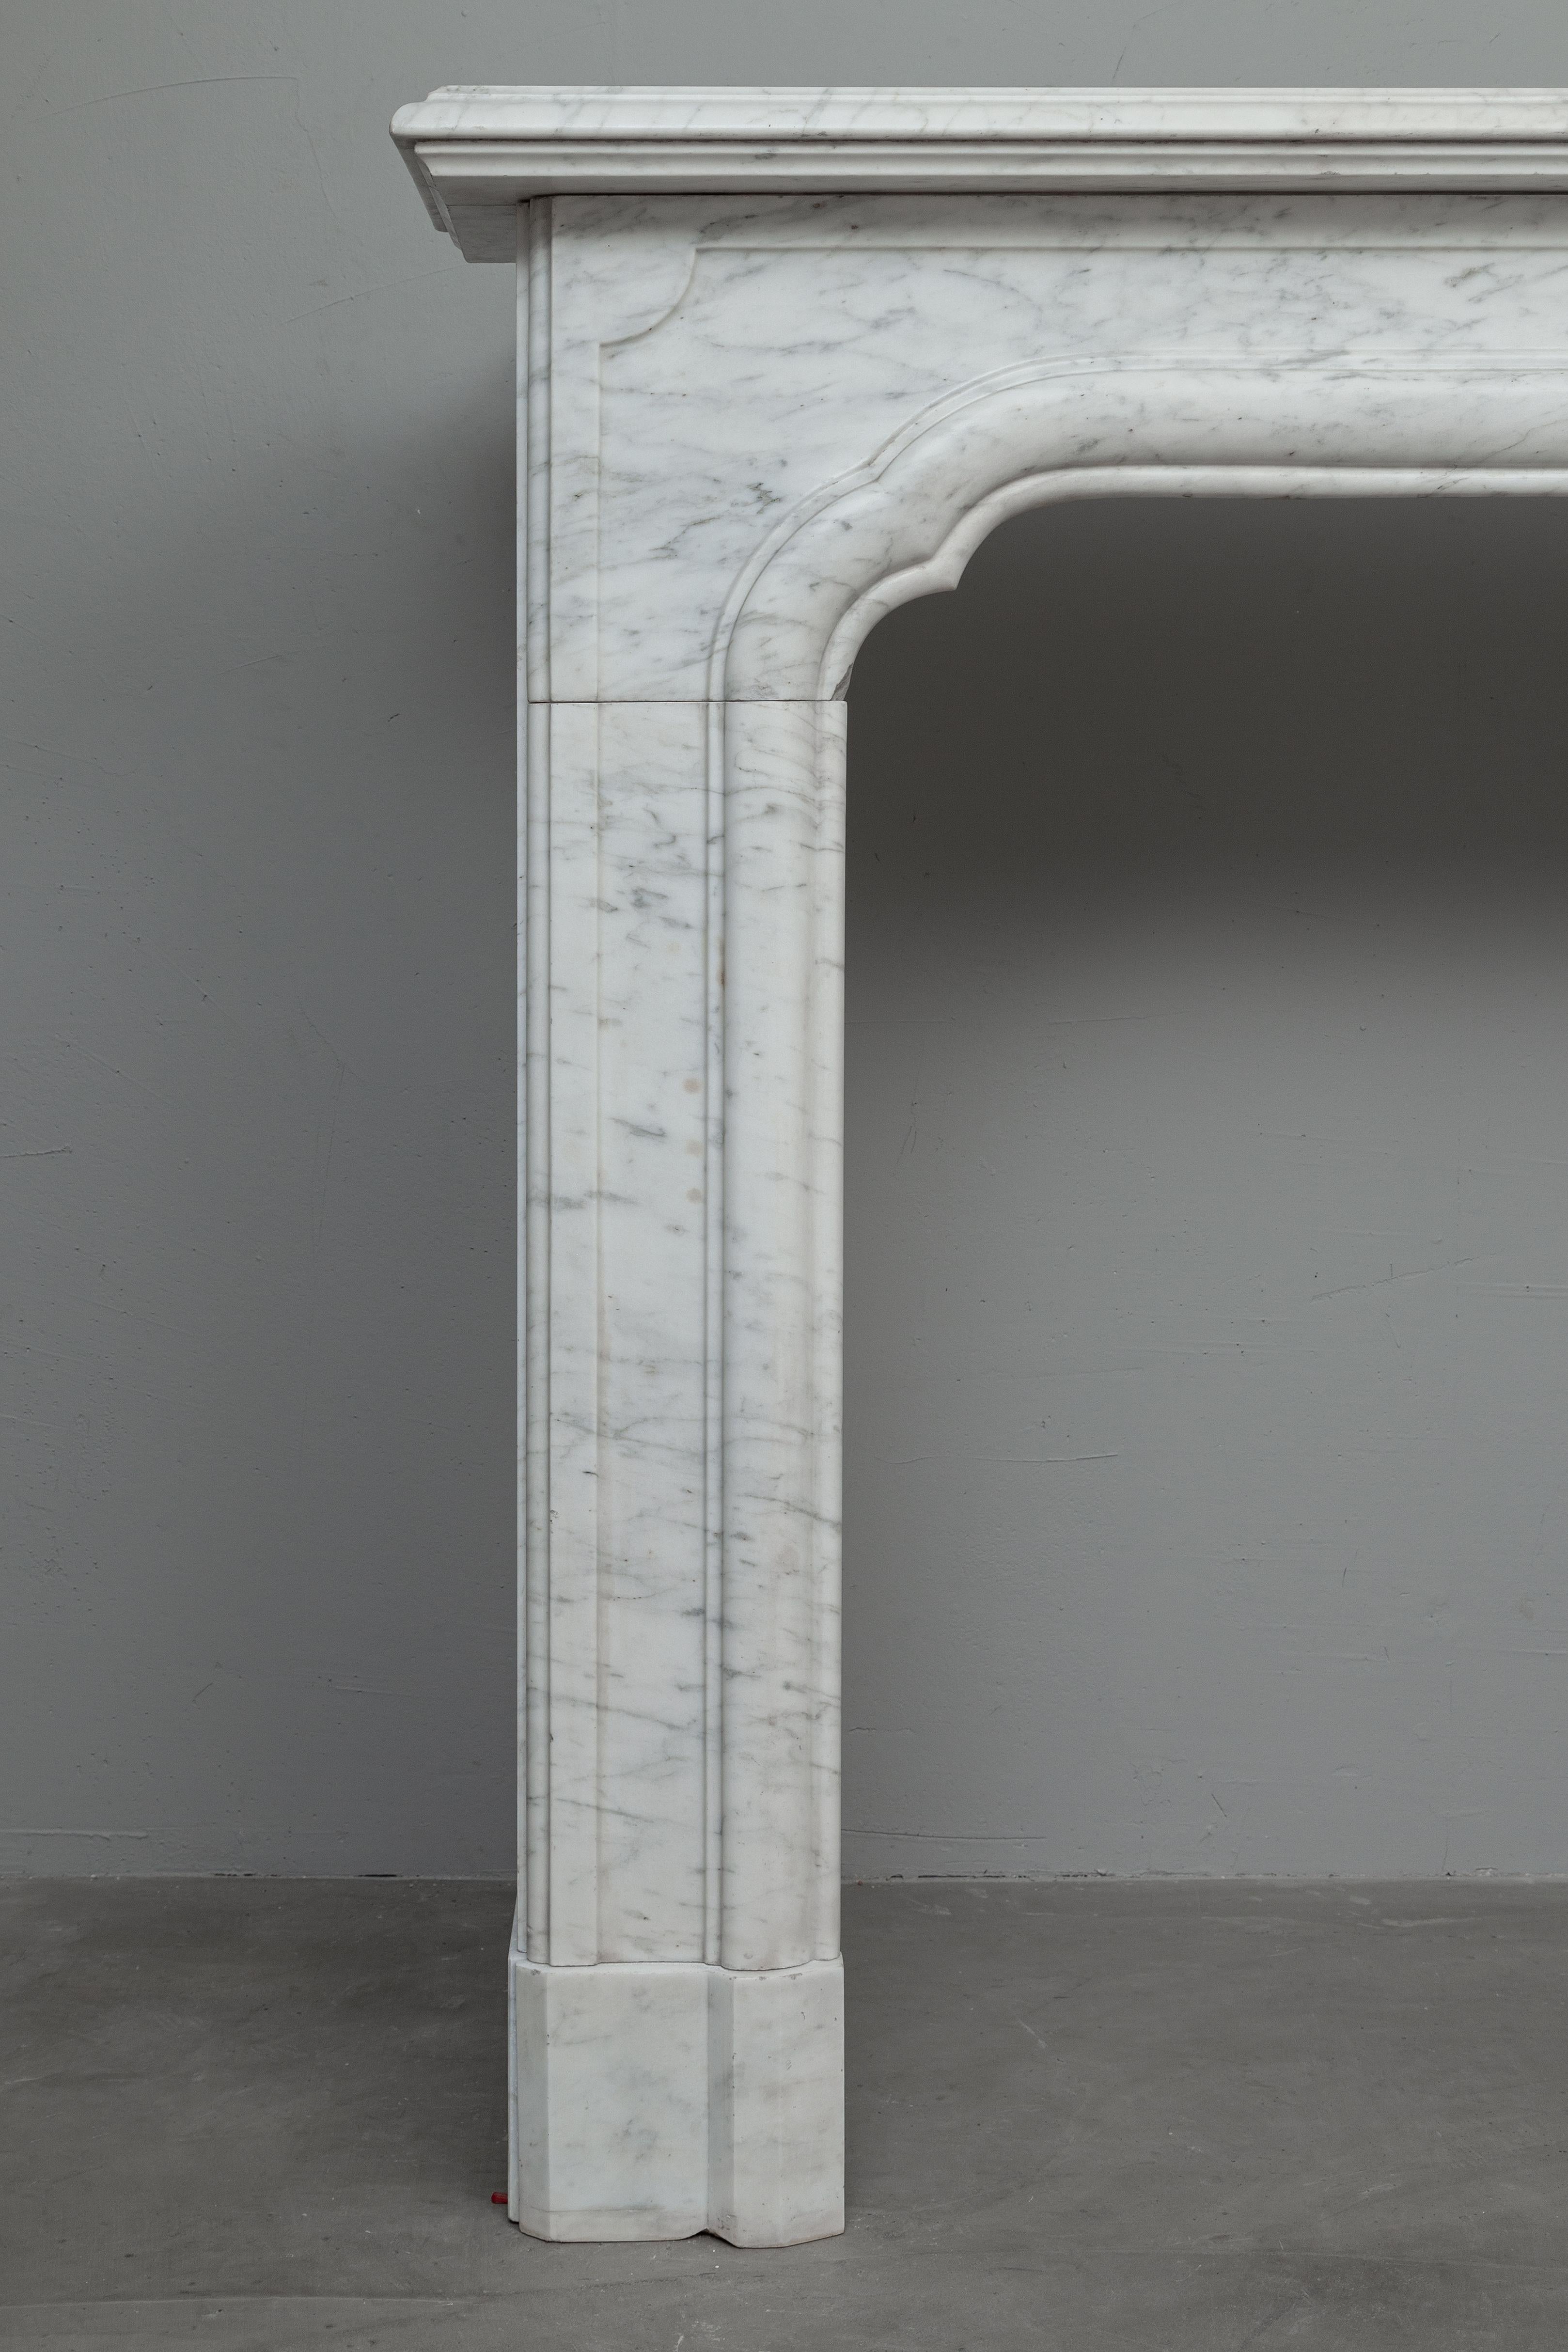 A beautiful sleek Art Deco fireplace made of Carrara marble. Simplicity and elegance meet in this antique Art Deco fireplace. The double profiled crook top and beautiful veining combined with the sleek design make this an asset for both a modern and